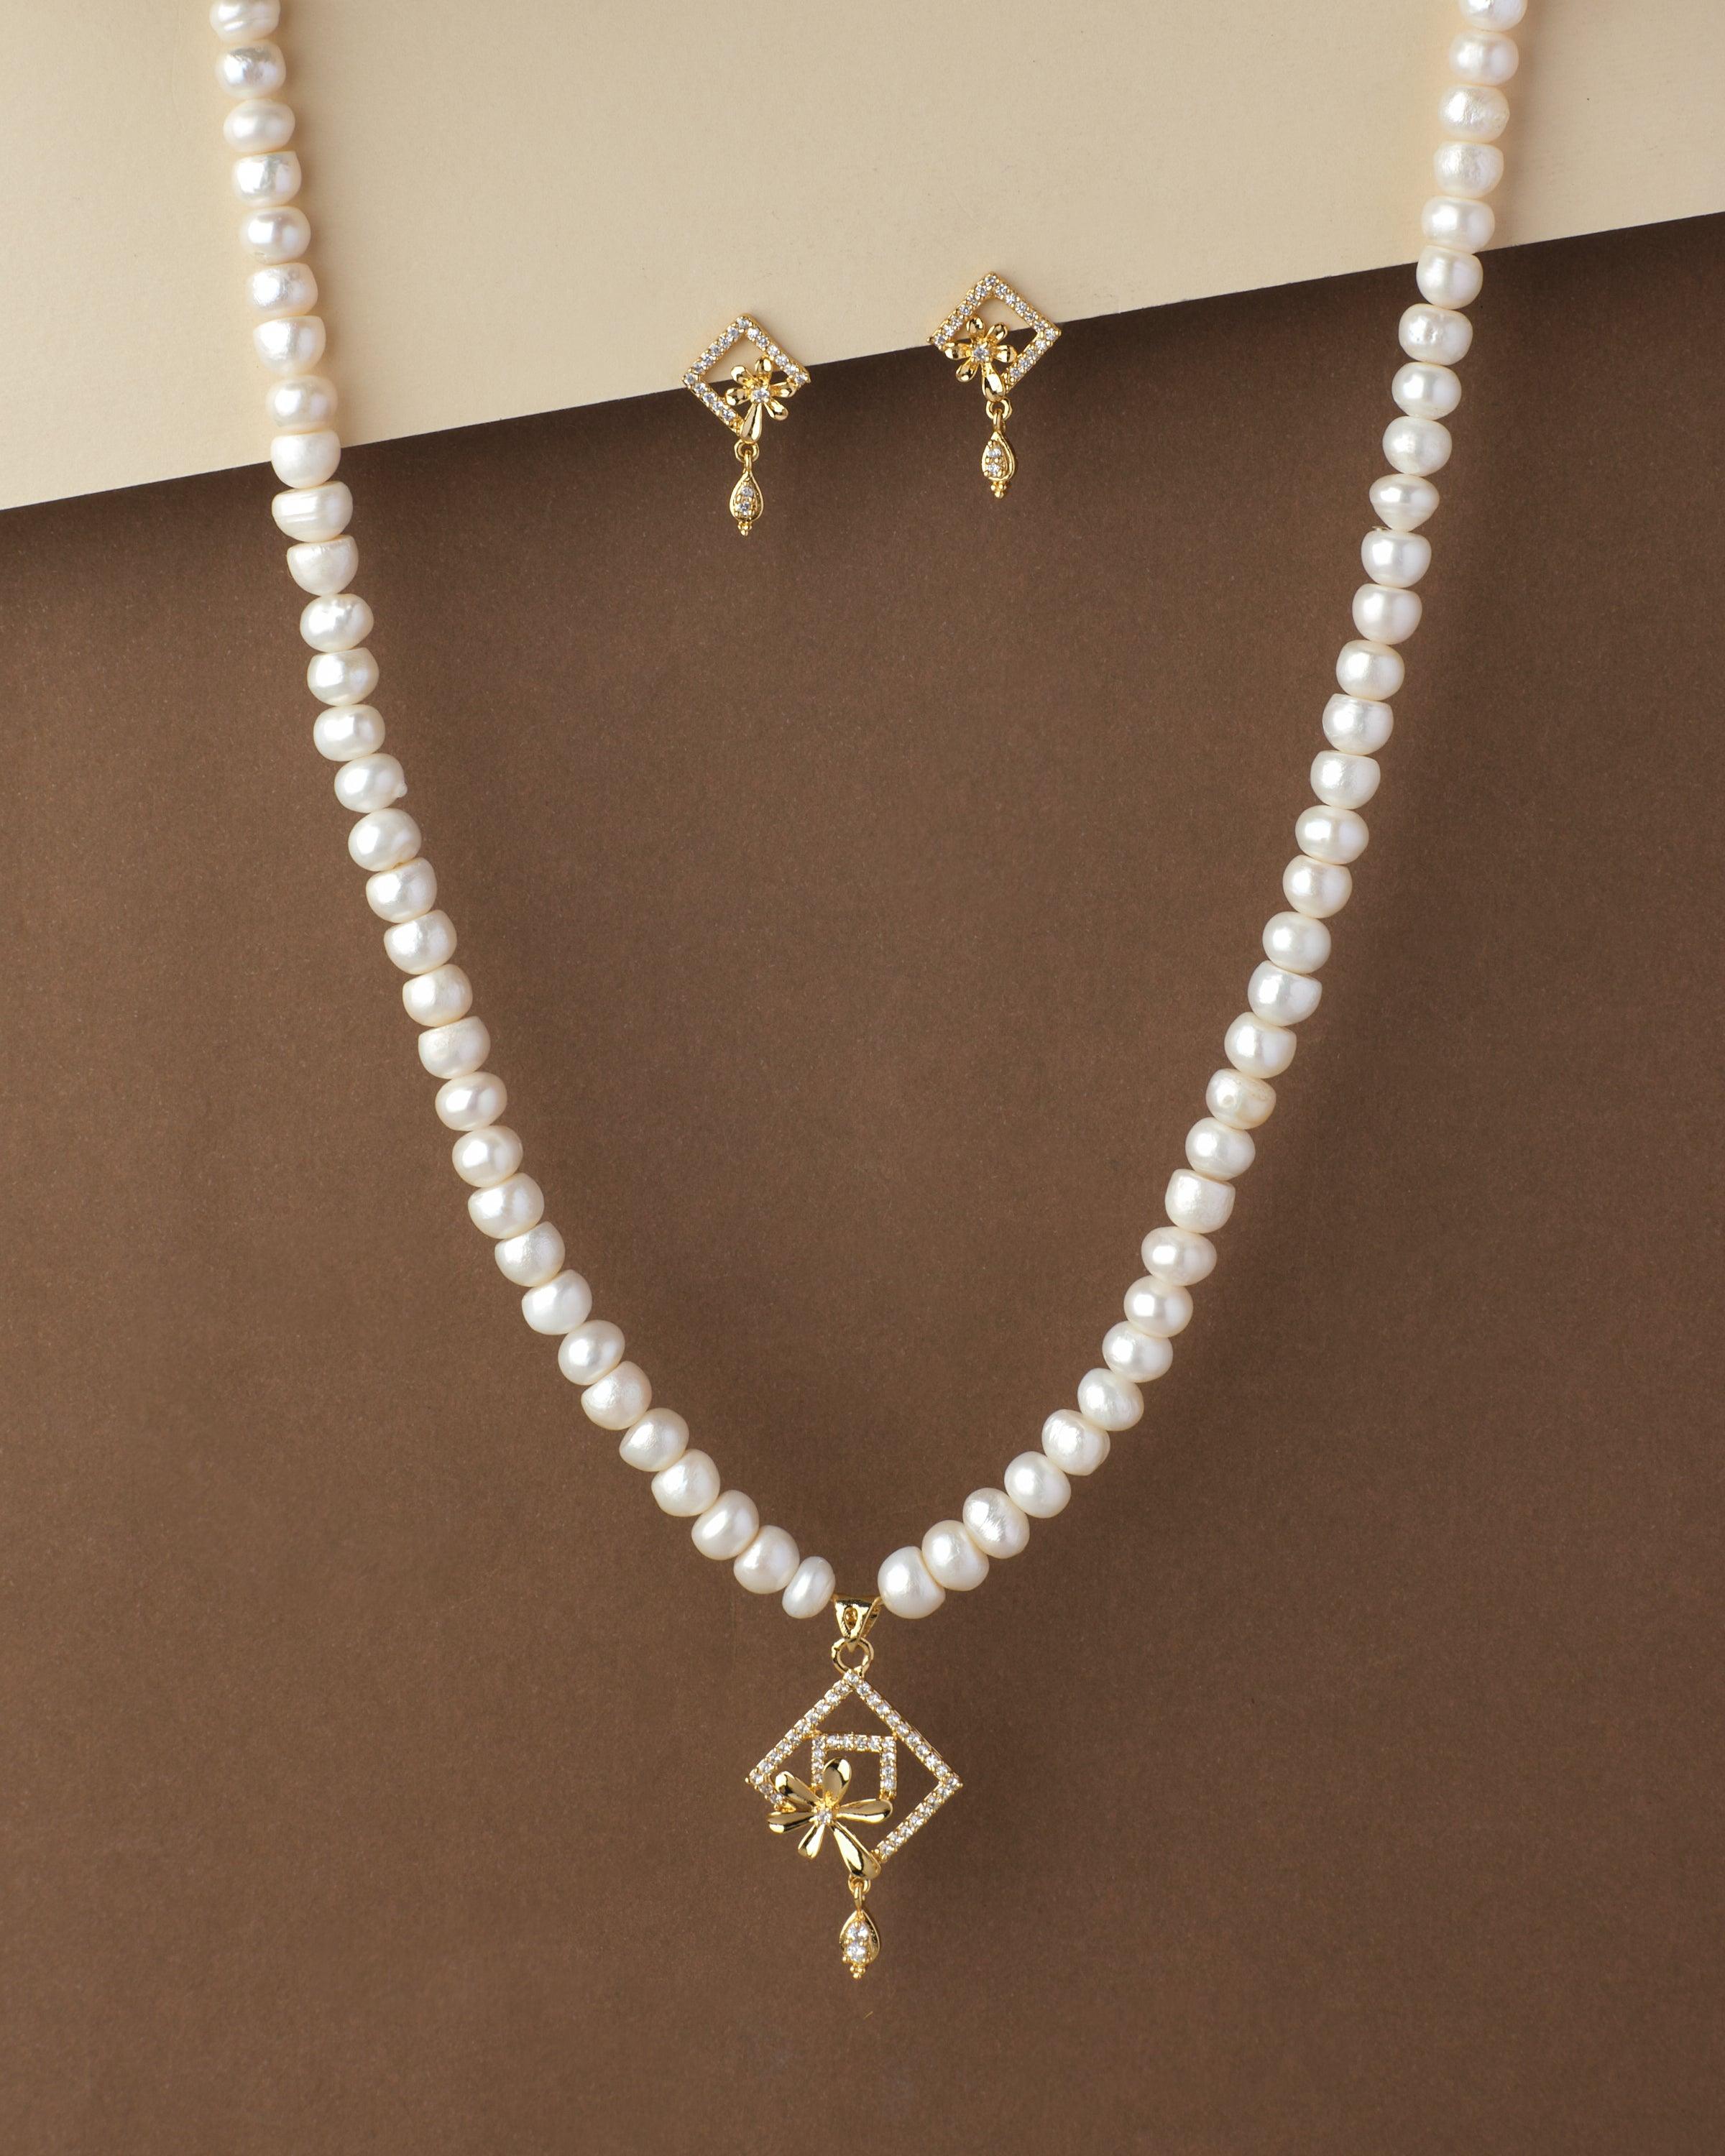 Mikimoto Pearl Pendant Solitaire Necklace in 18k Gold